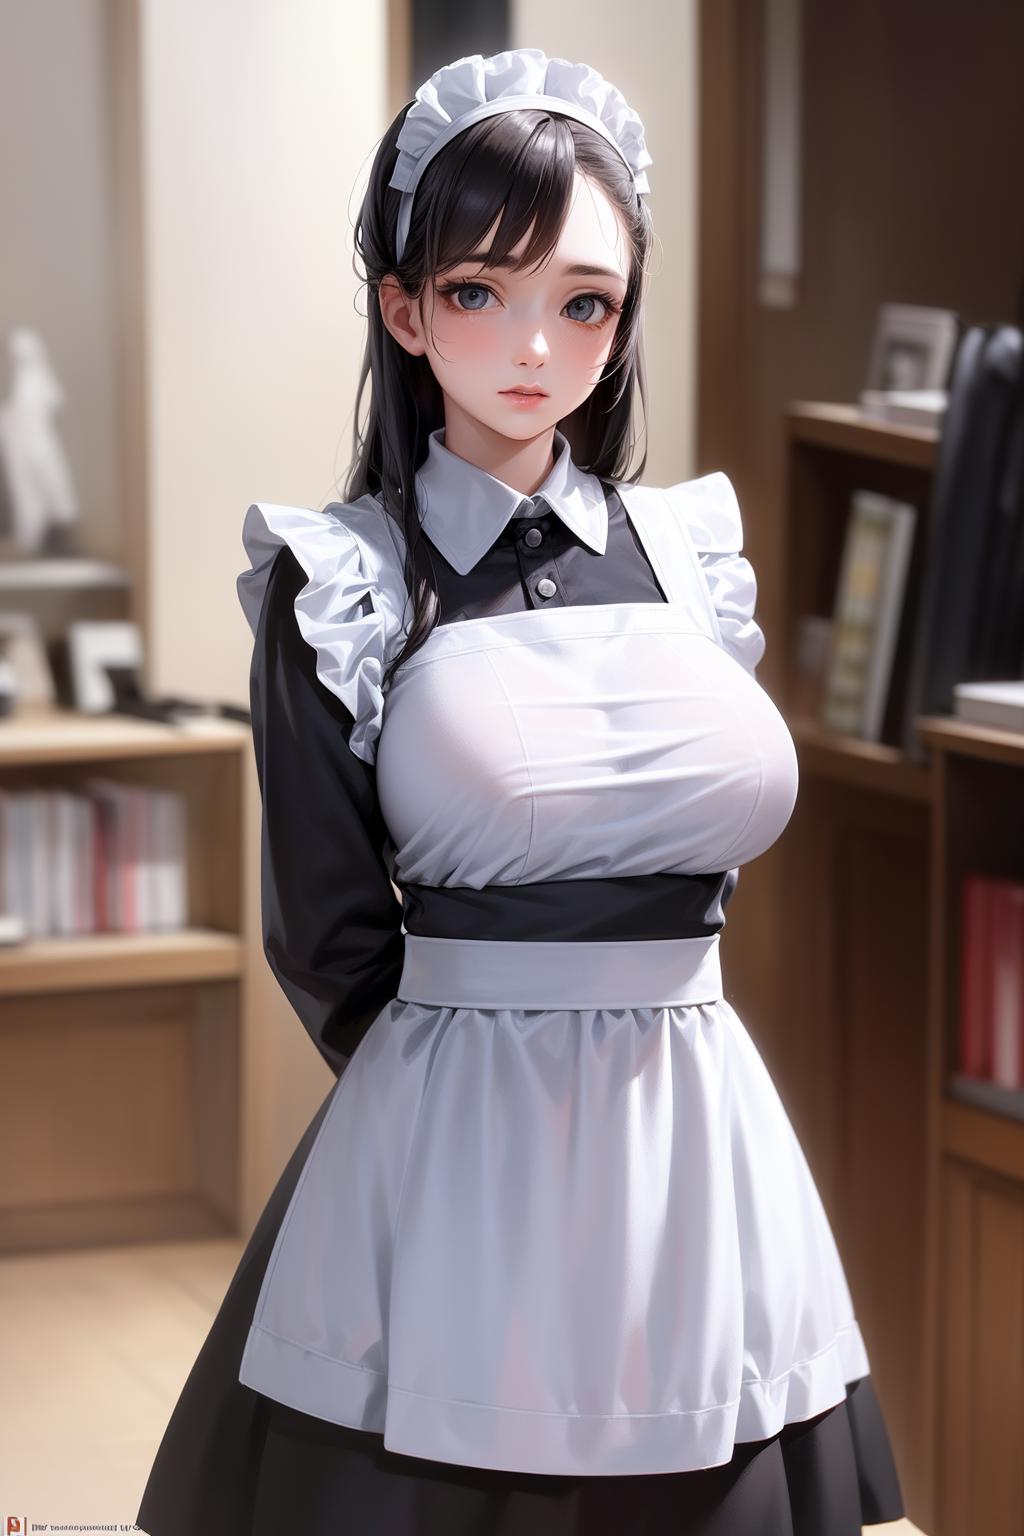 Traditional Maid Dress image by topict